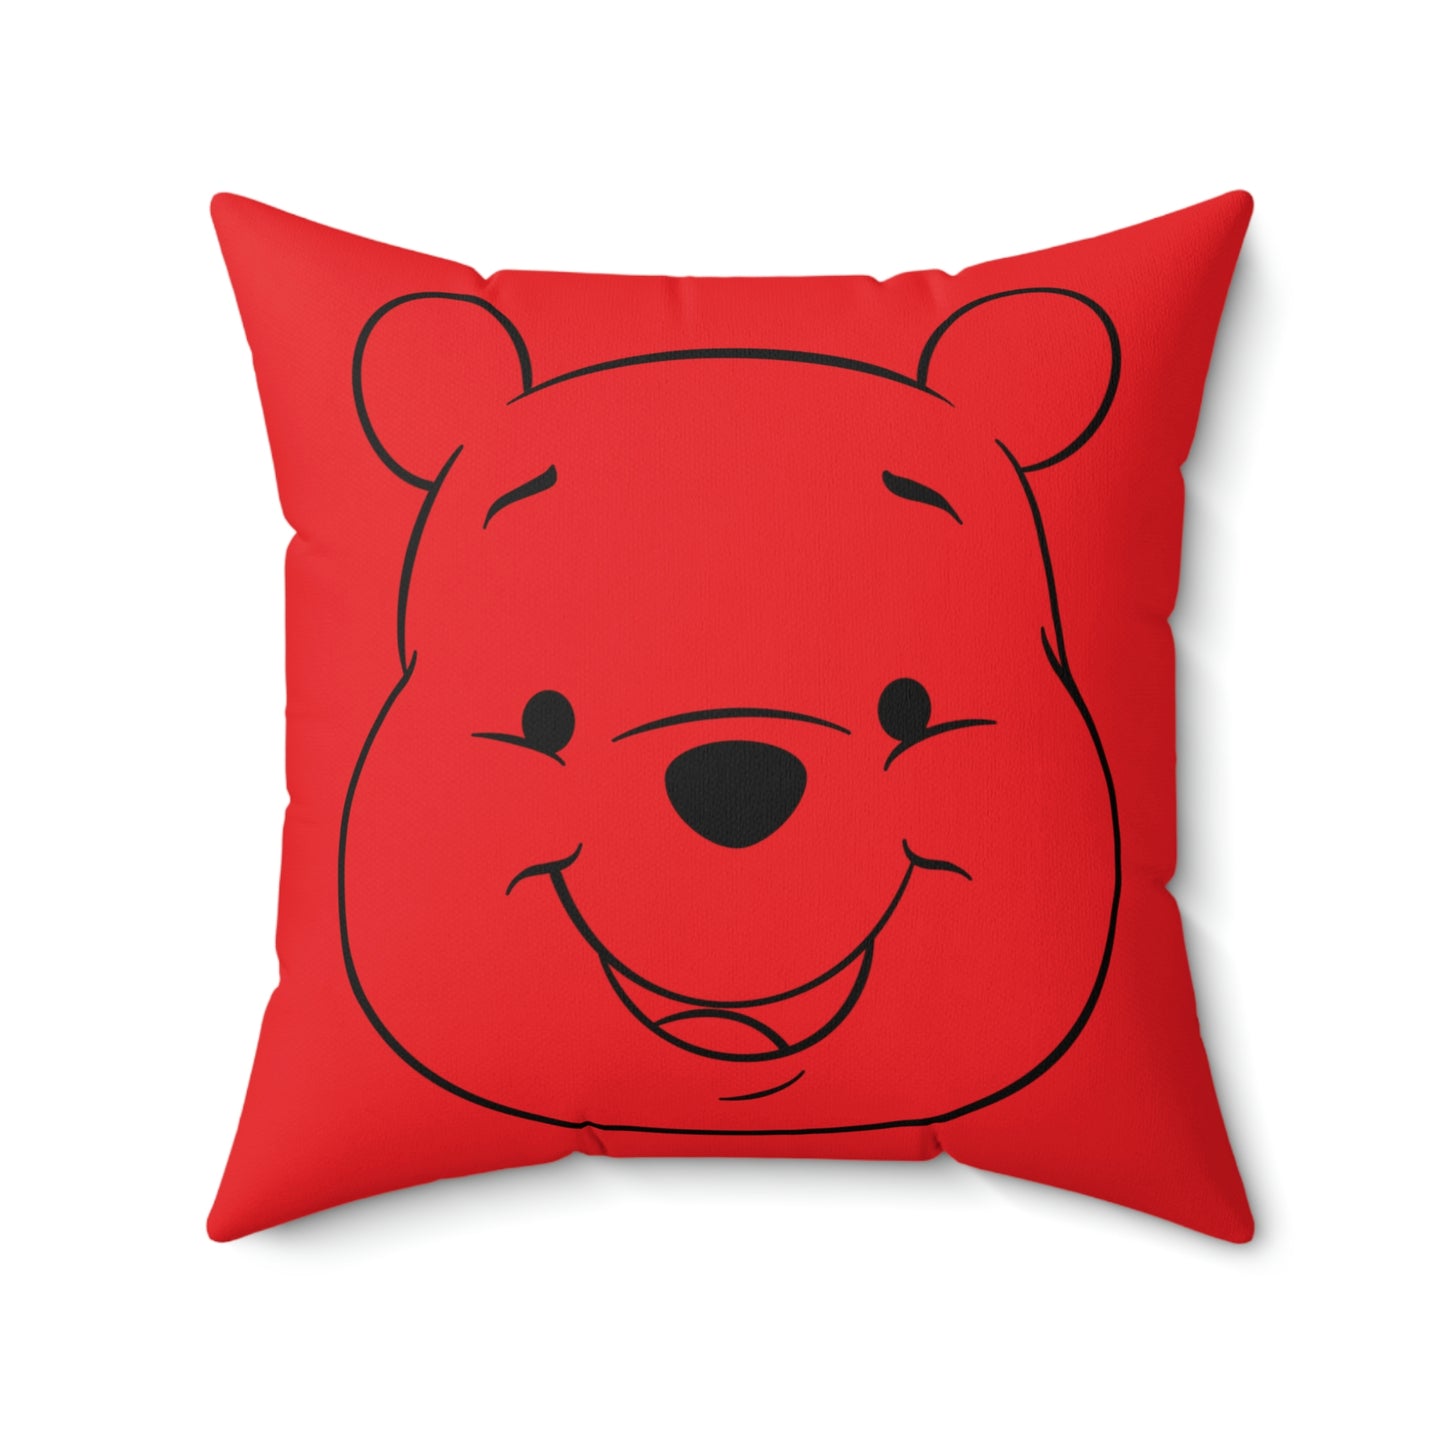 Spun Polyester Square Pillow Case “Pooh Line on Red”